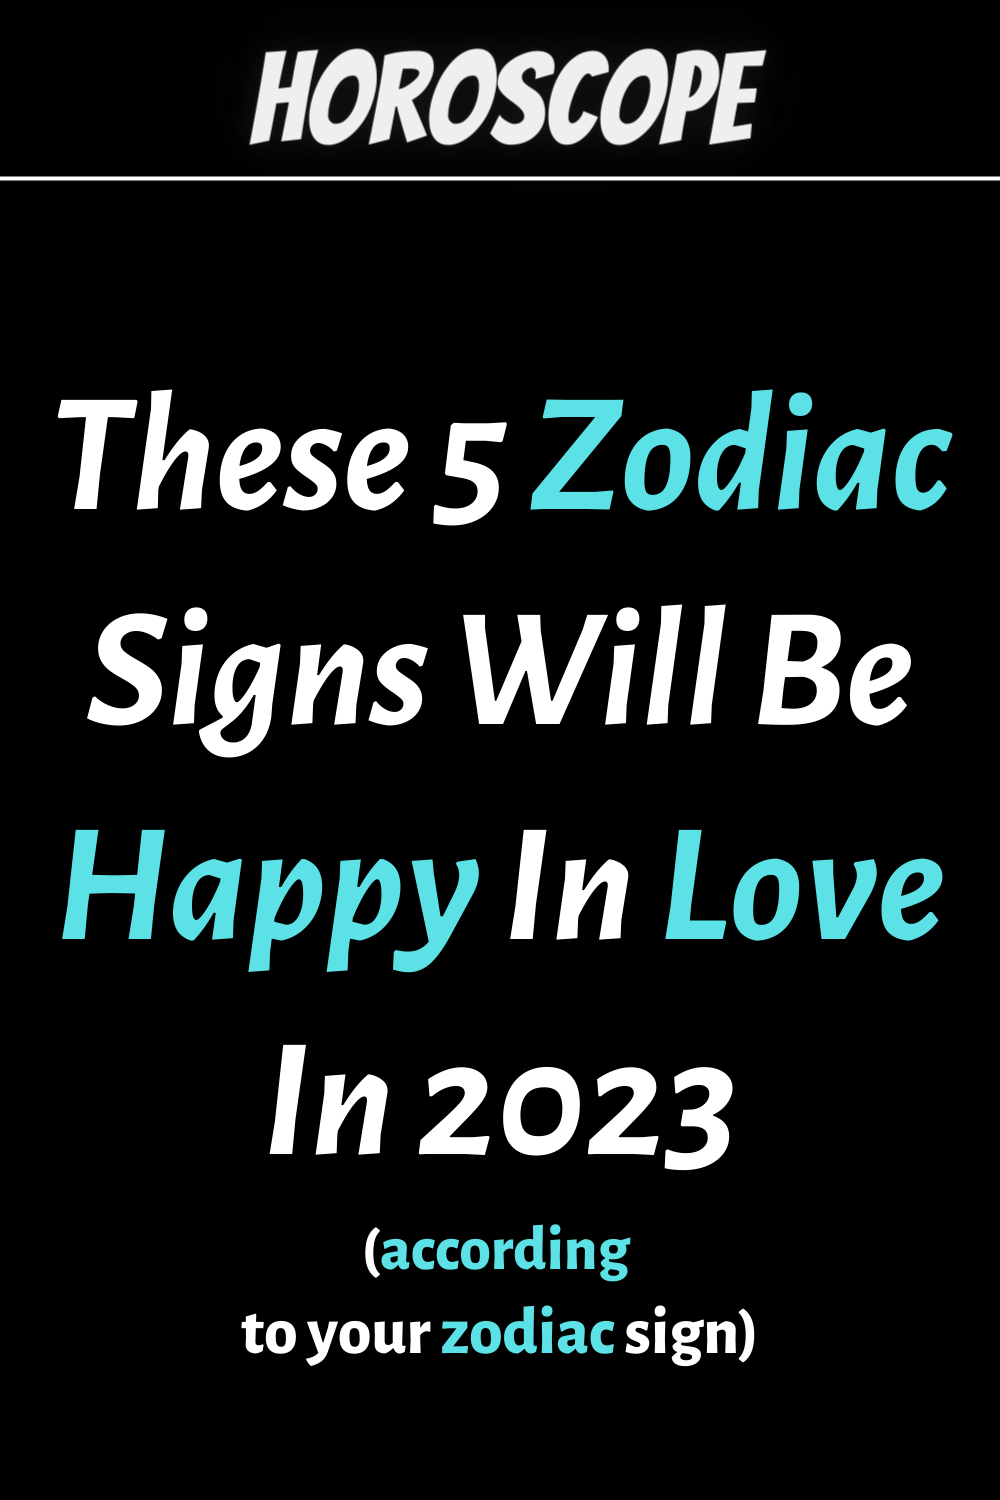 These 5 Zodiac Signs Will Be Happy In Love In 2023